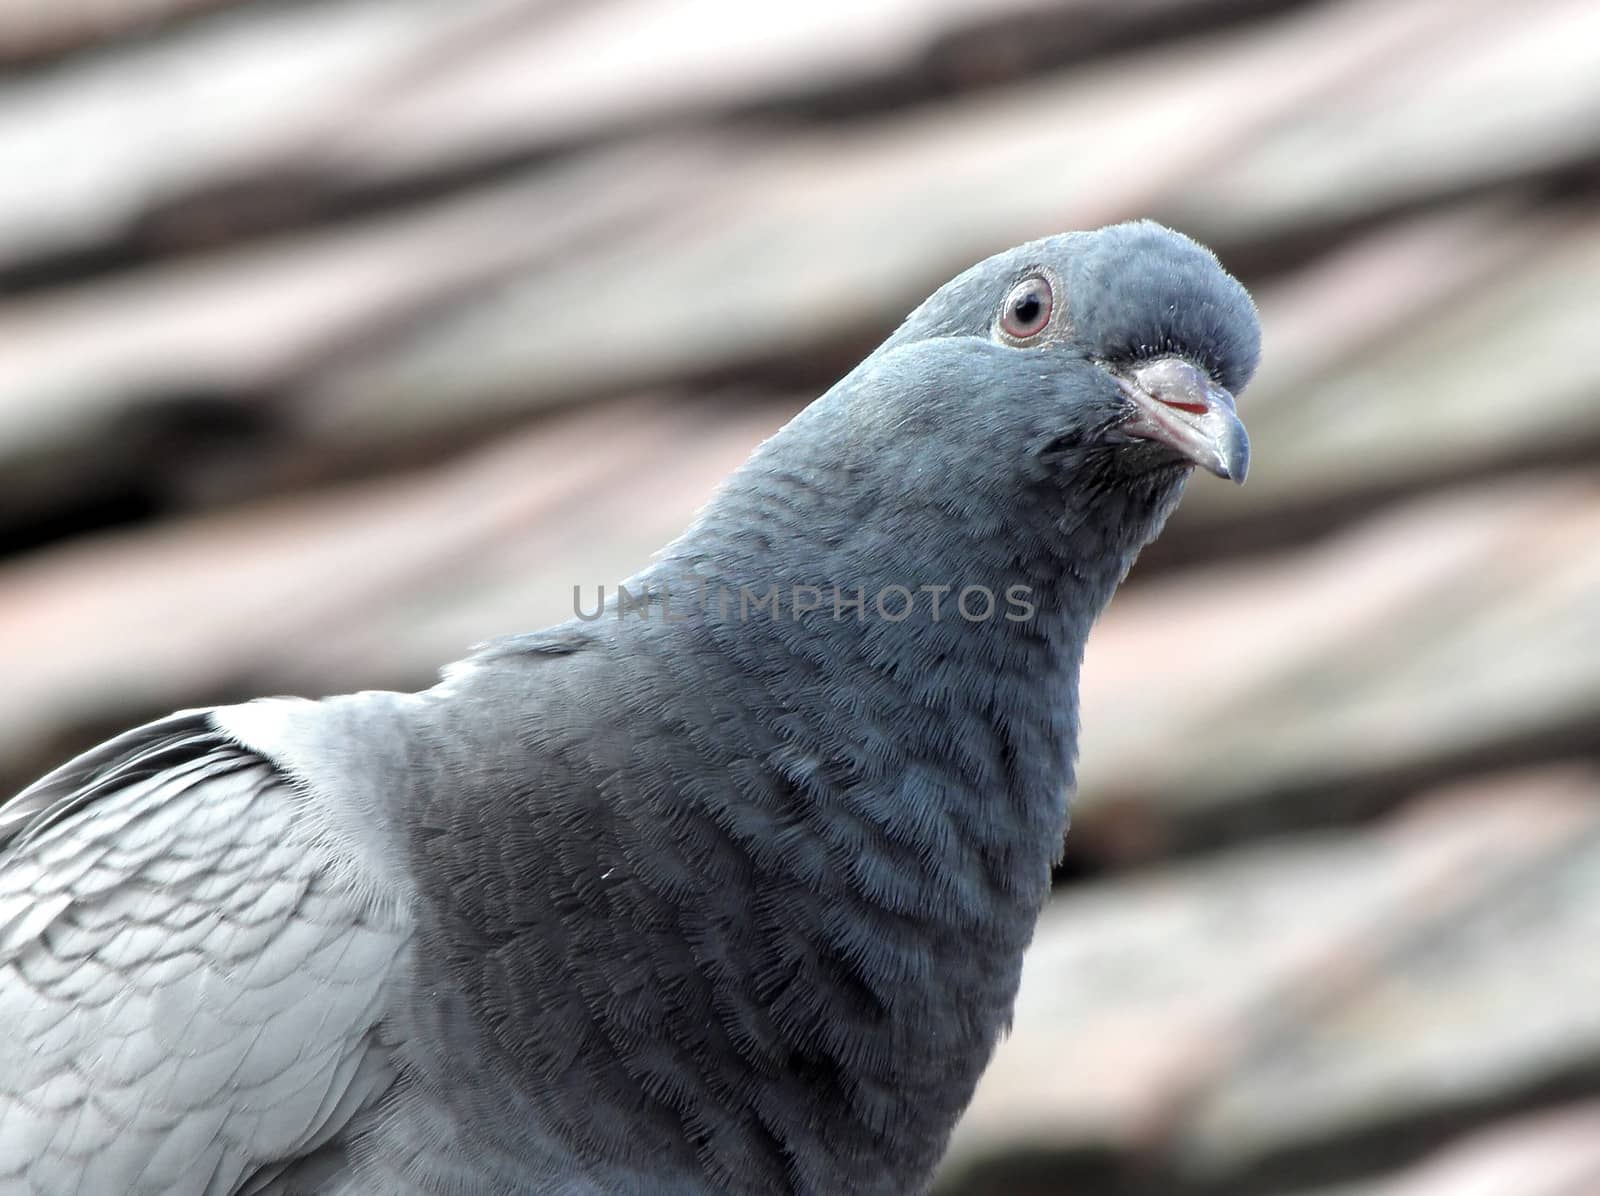 Urban pigeons. Dove of the human environment.